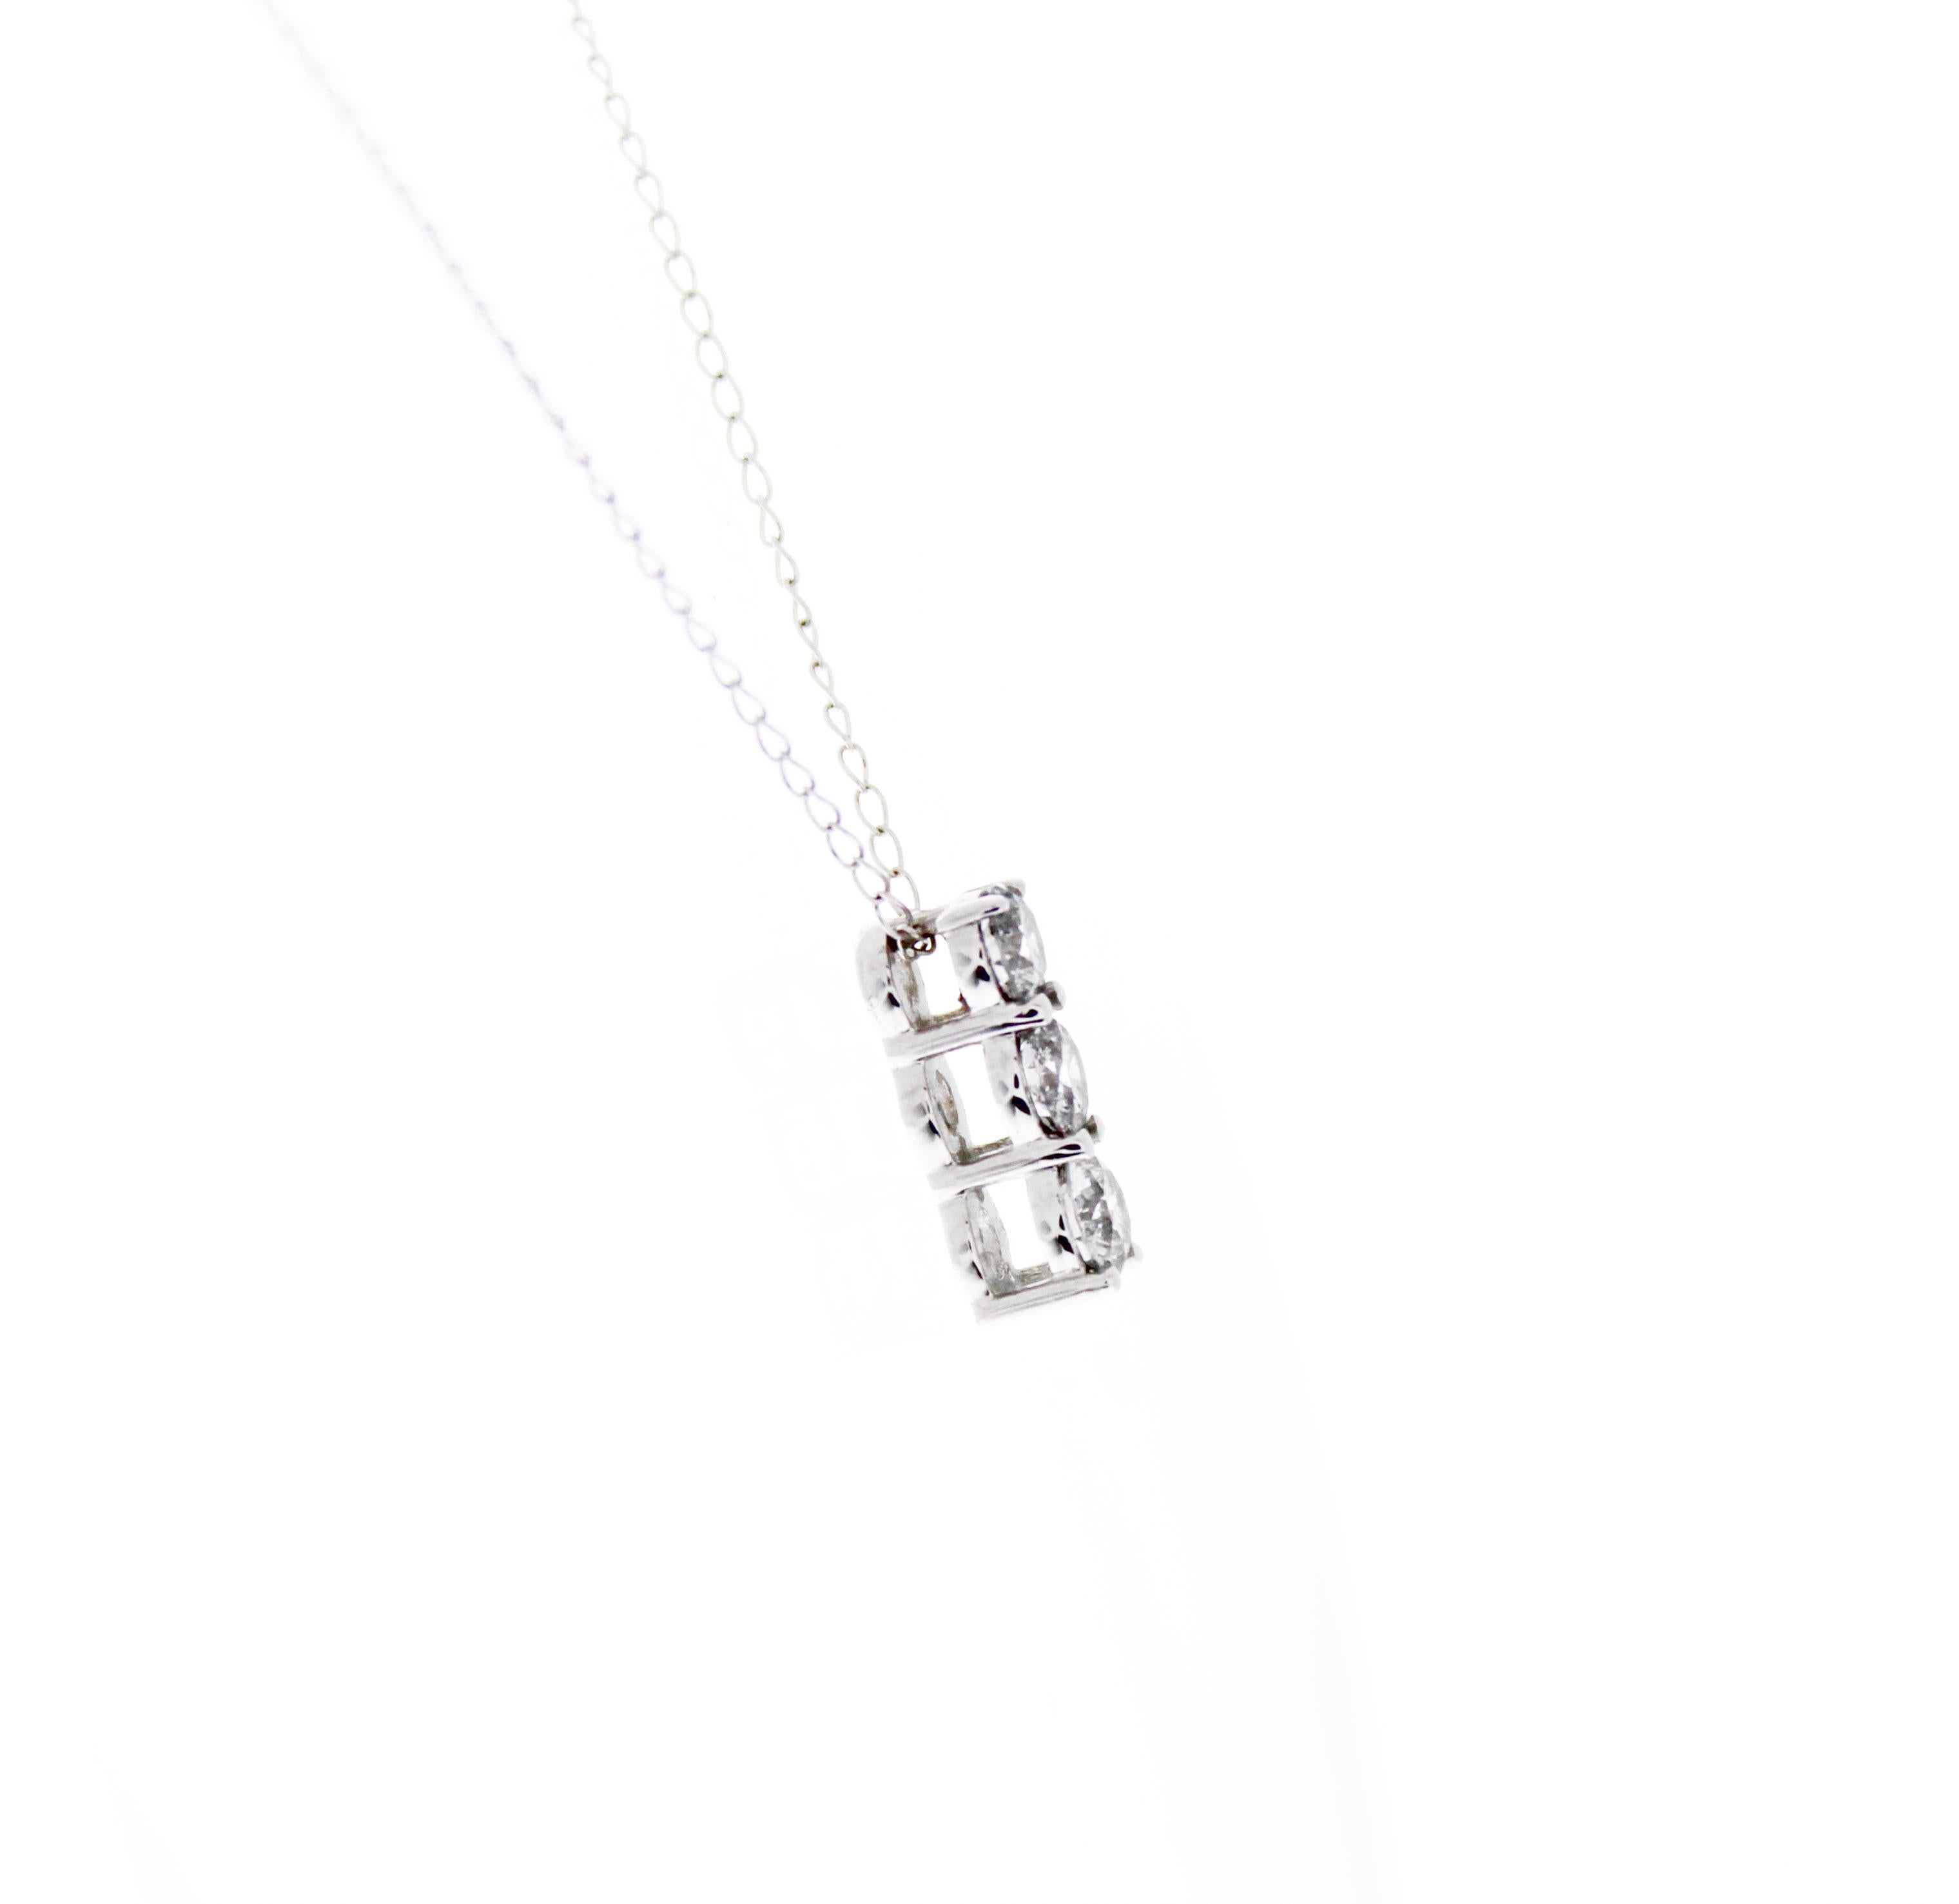 This impressive three-stone round diamond pendant is finely crafted in brightly polished 14 karat white gold and features three stones totaling a carat weight of 0.50CTW. These diamonds are I1 clarity. Ideal as an anniversary or birthday present,